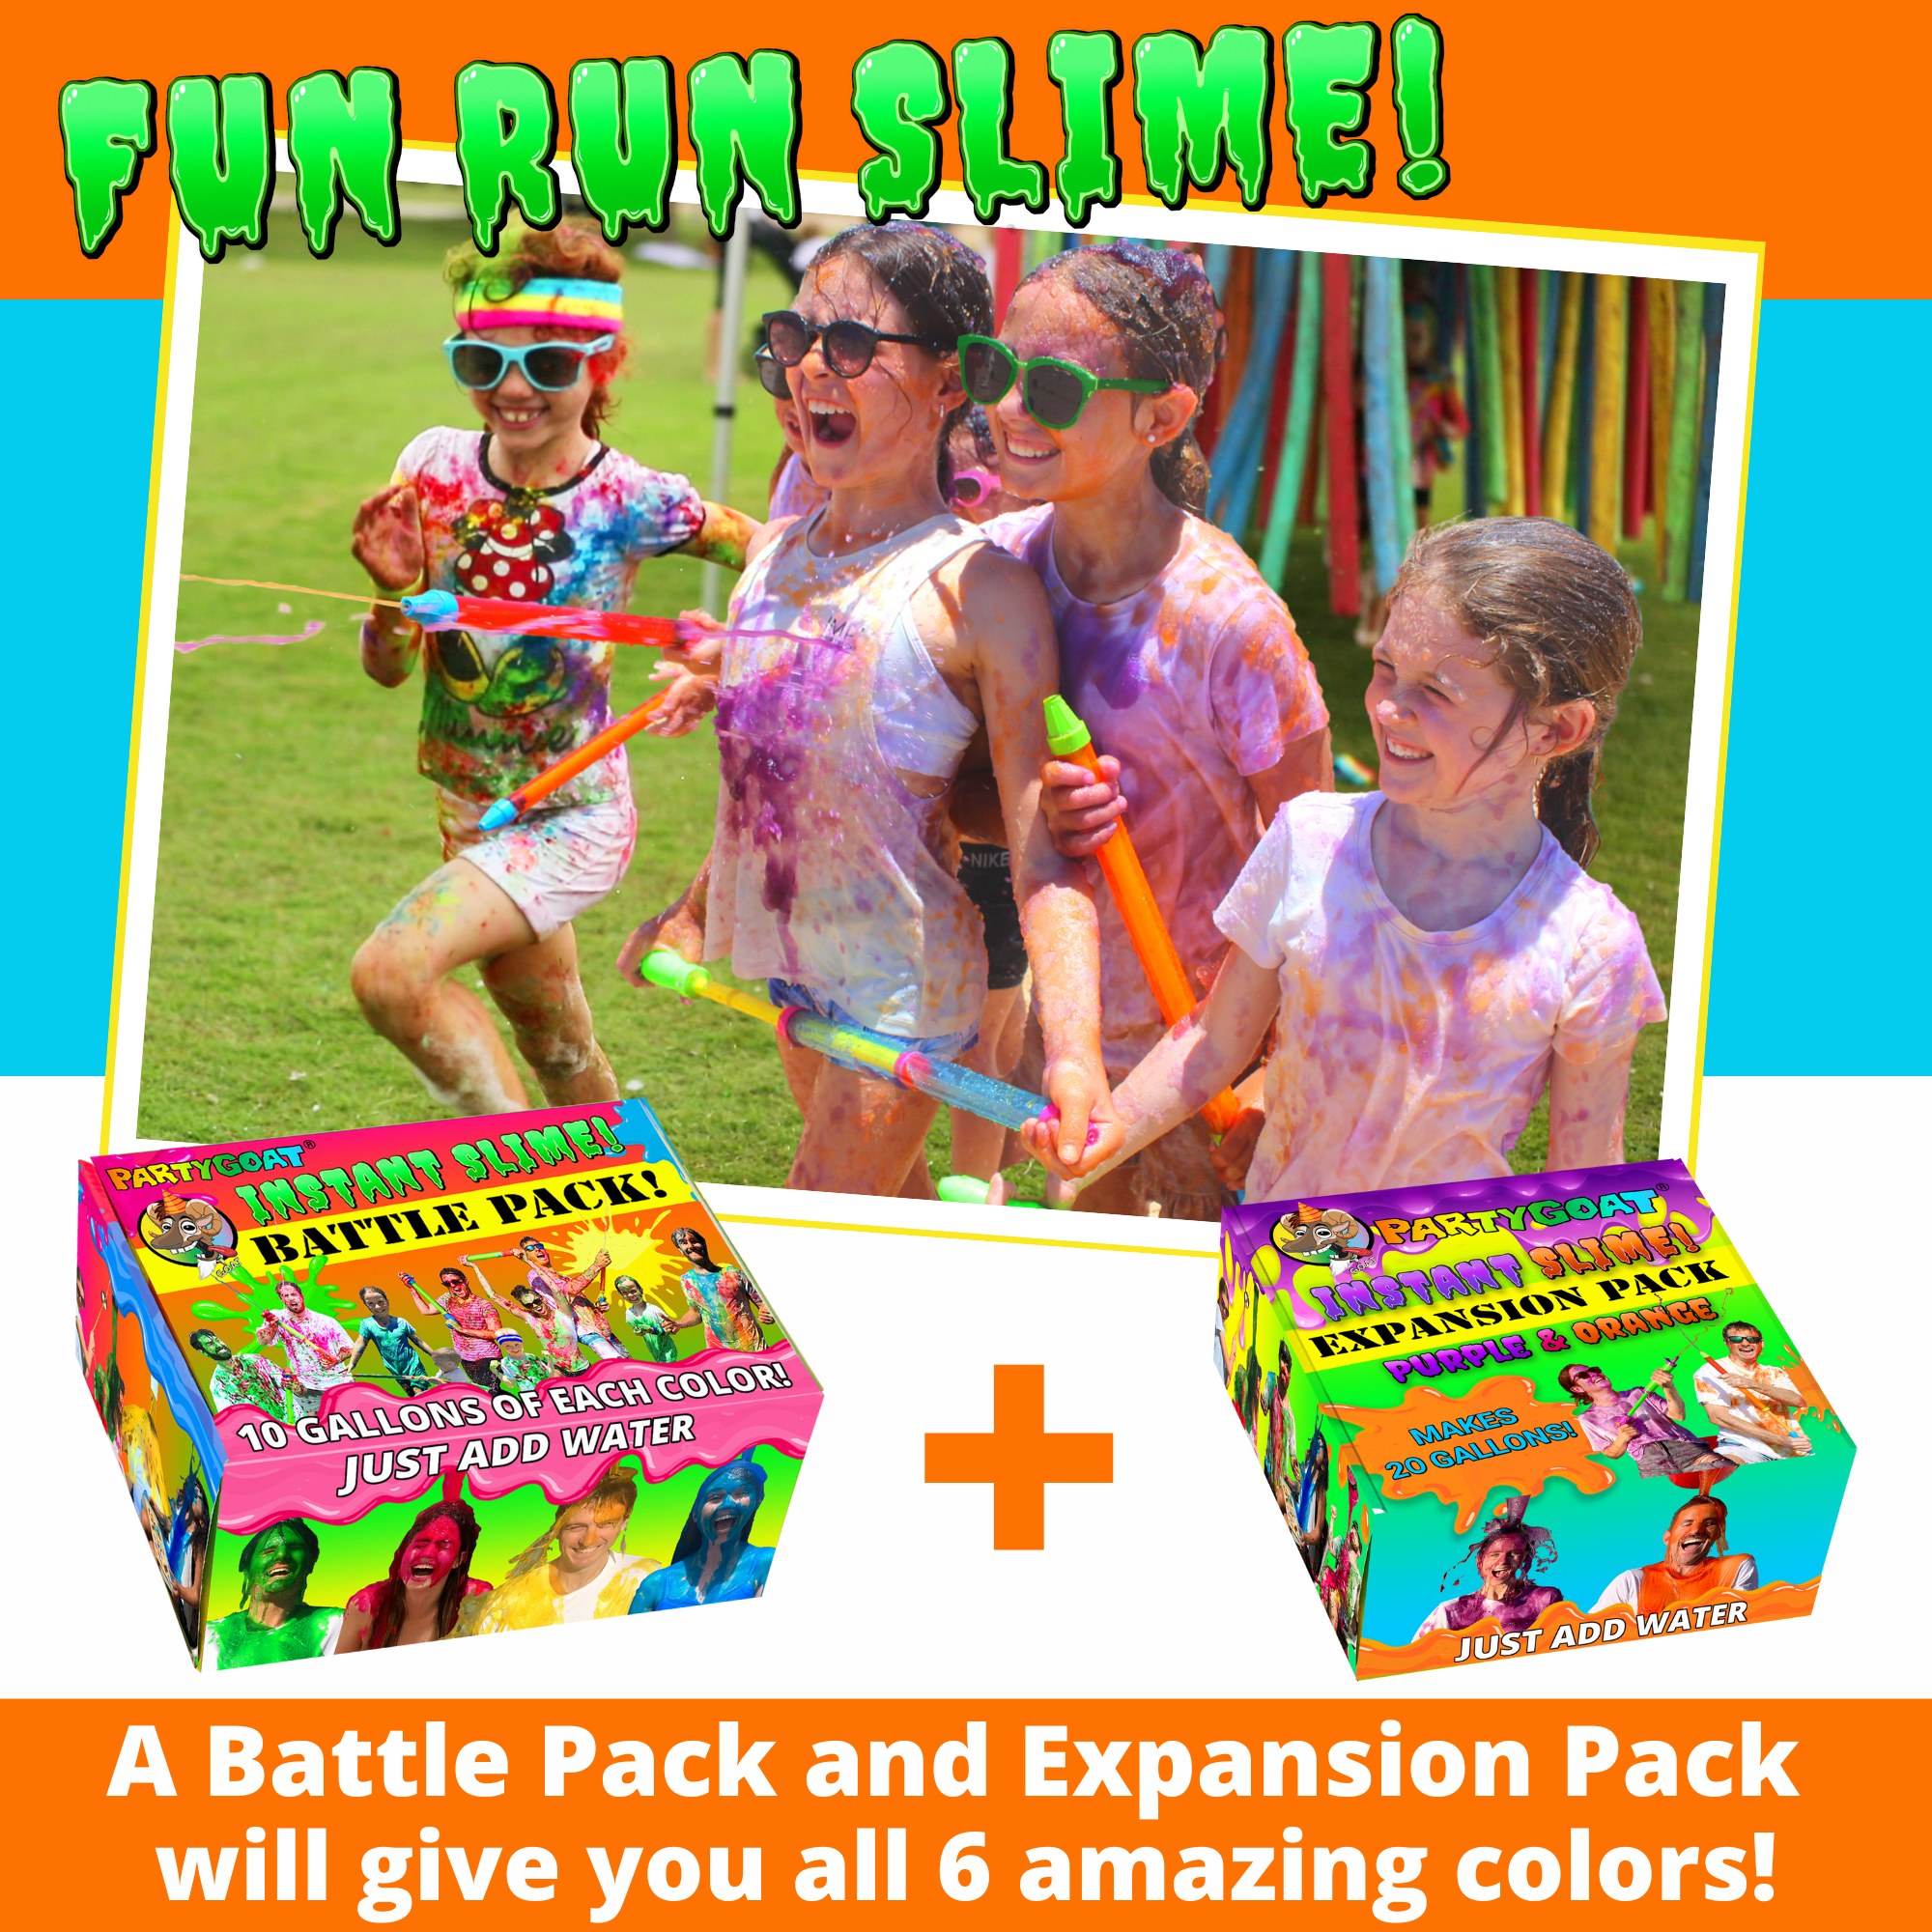 Bulk Instant Slime Powder! Mix with Water to Make A Huge 40 Gallons of Slime! 4 Colors for Slime Bucket Challenges, Color Run, Blaster Gun, Bath